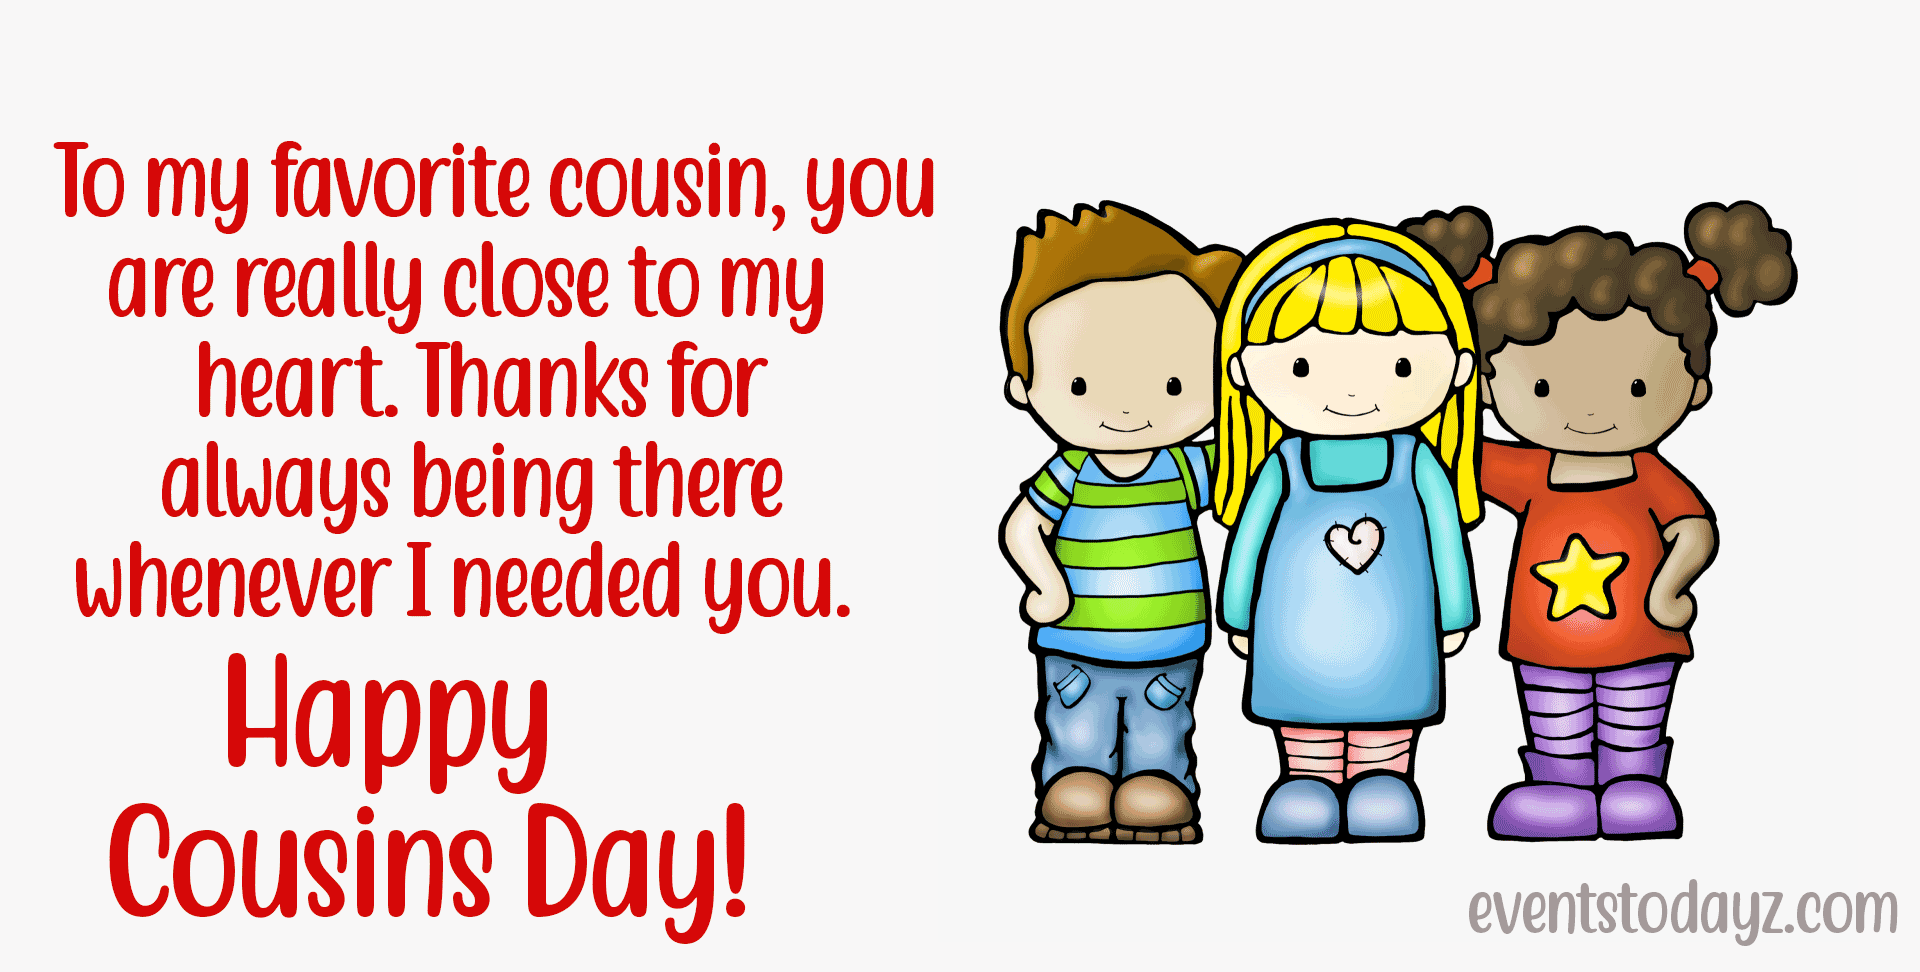 Happy Cousins Day GIF Images | Cousins Day Wishes